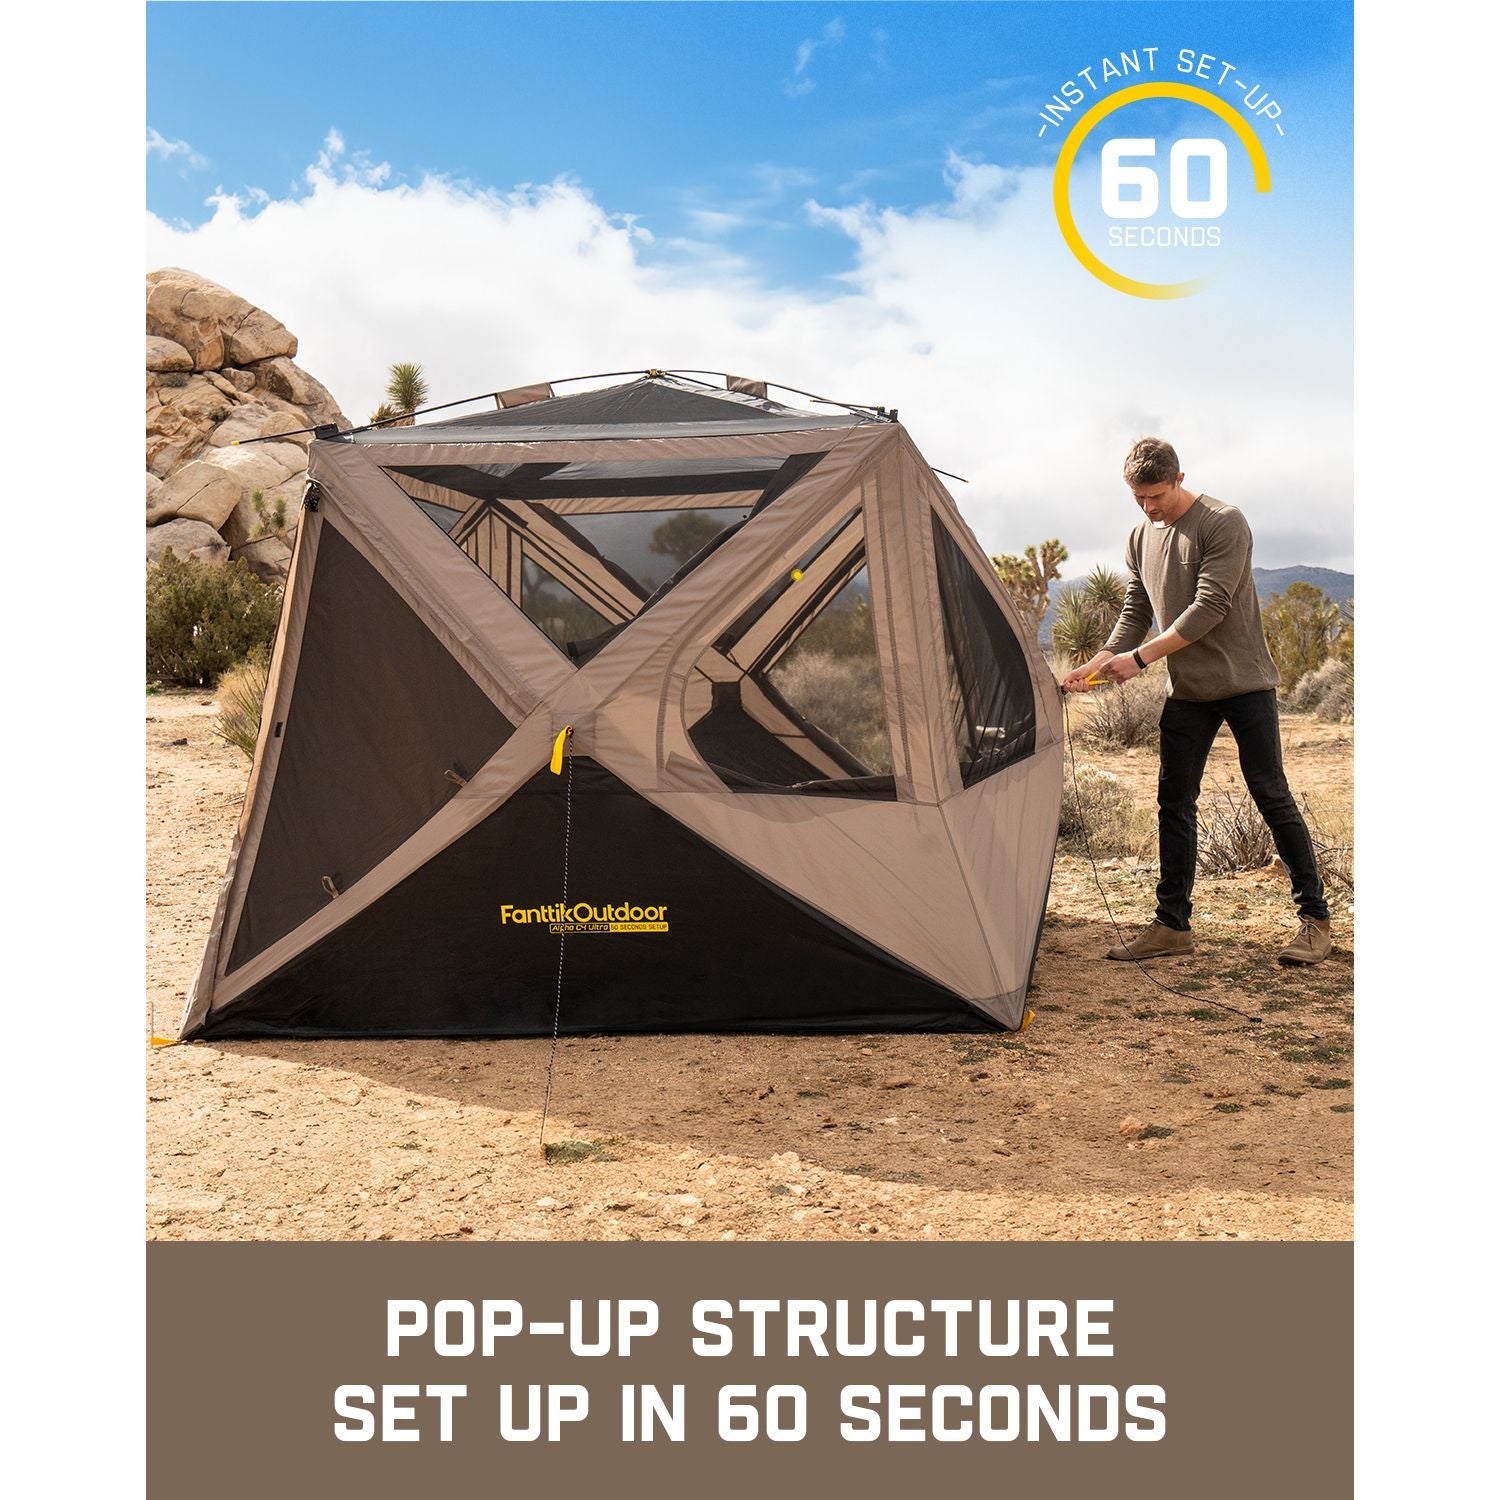 Person setting up FanttikOutdoor Alpha C4 Ultra Instant Cabin Tent in rocky outdoor area, featuring pop-up structure that sets up in 60 seconds